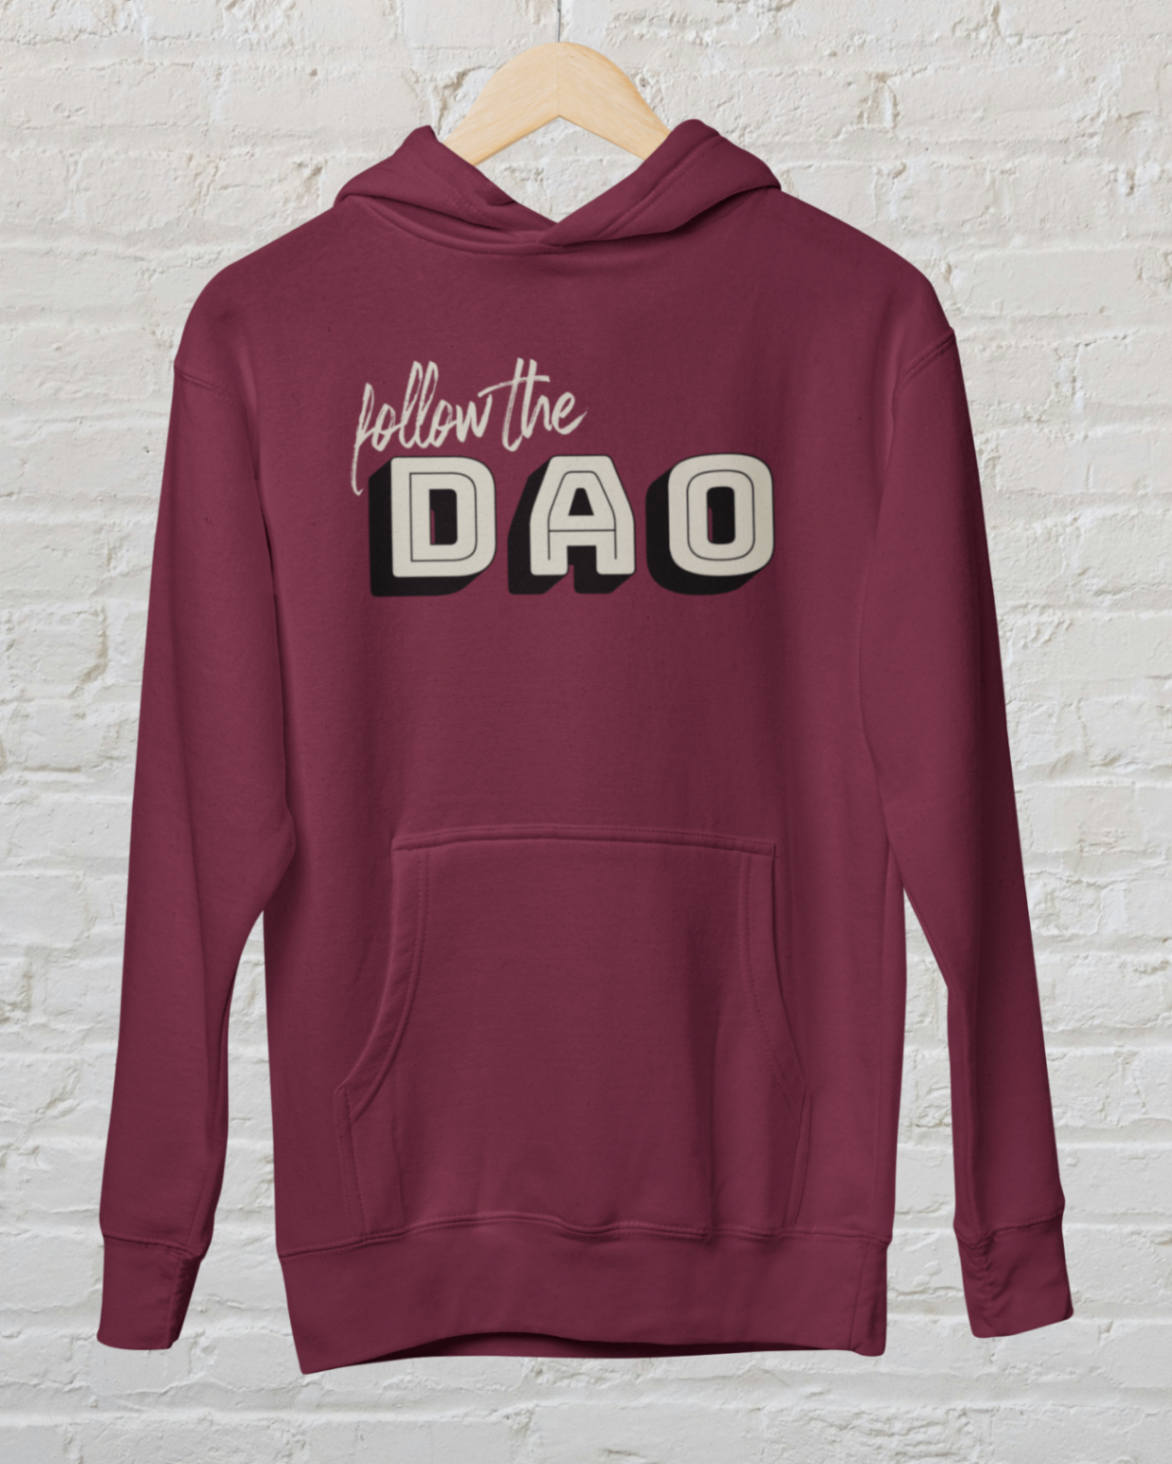 a Burgundy hoodie with follow the dao design over a white brick backround